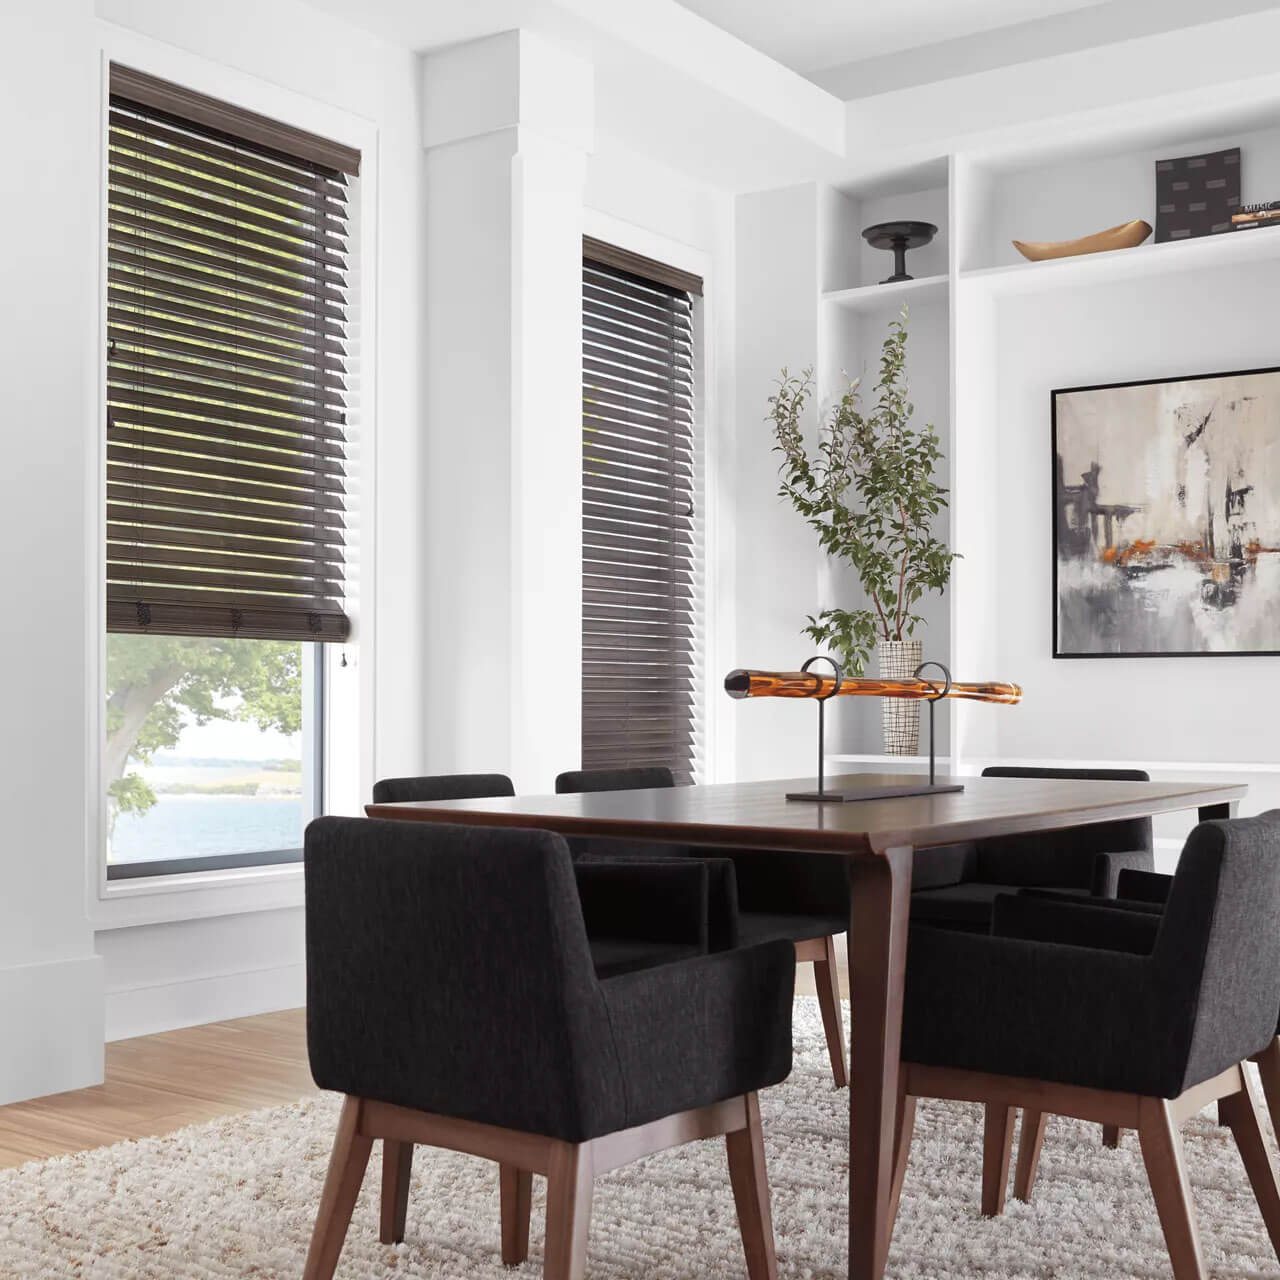 Window covering in dining room | The L&L Company